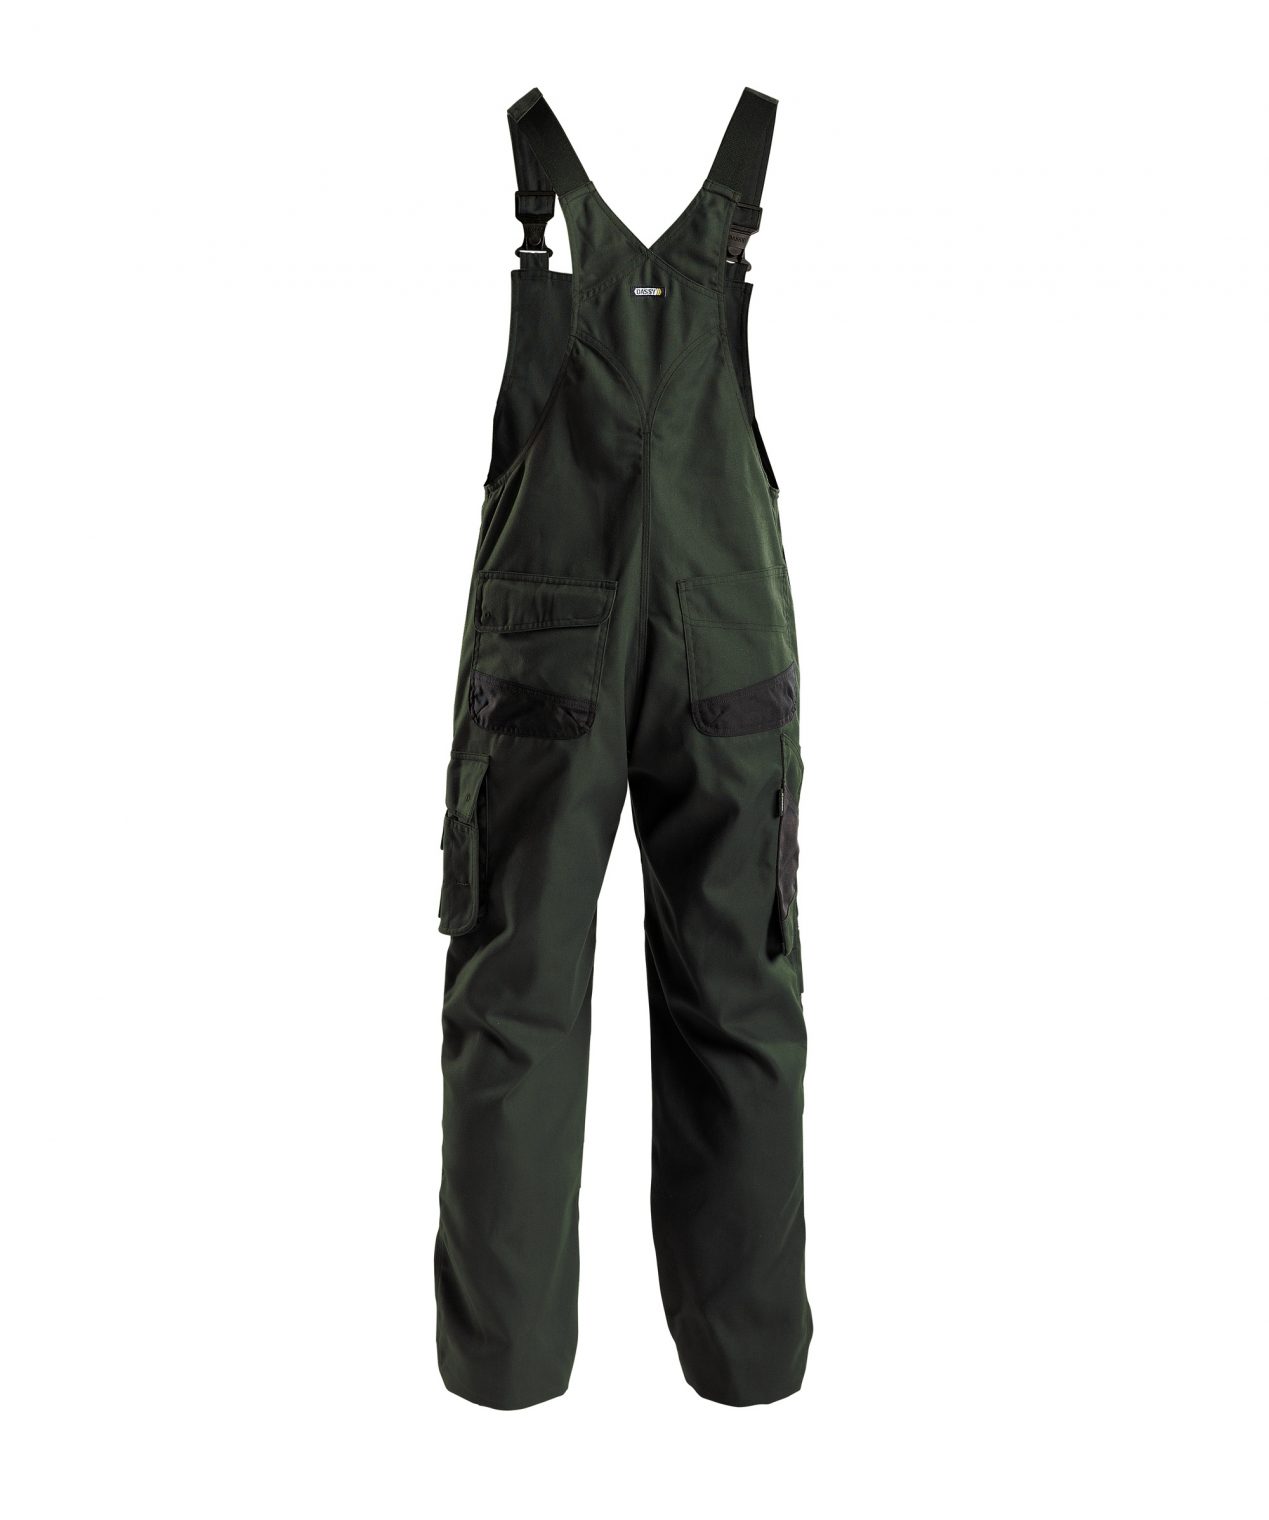 bolt canvas brace overall with knee pockets moss green black back